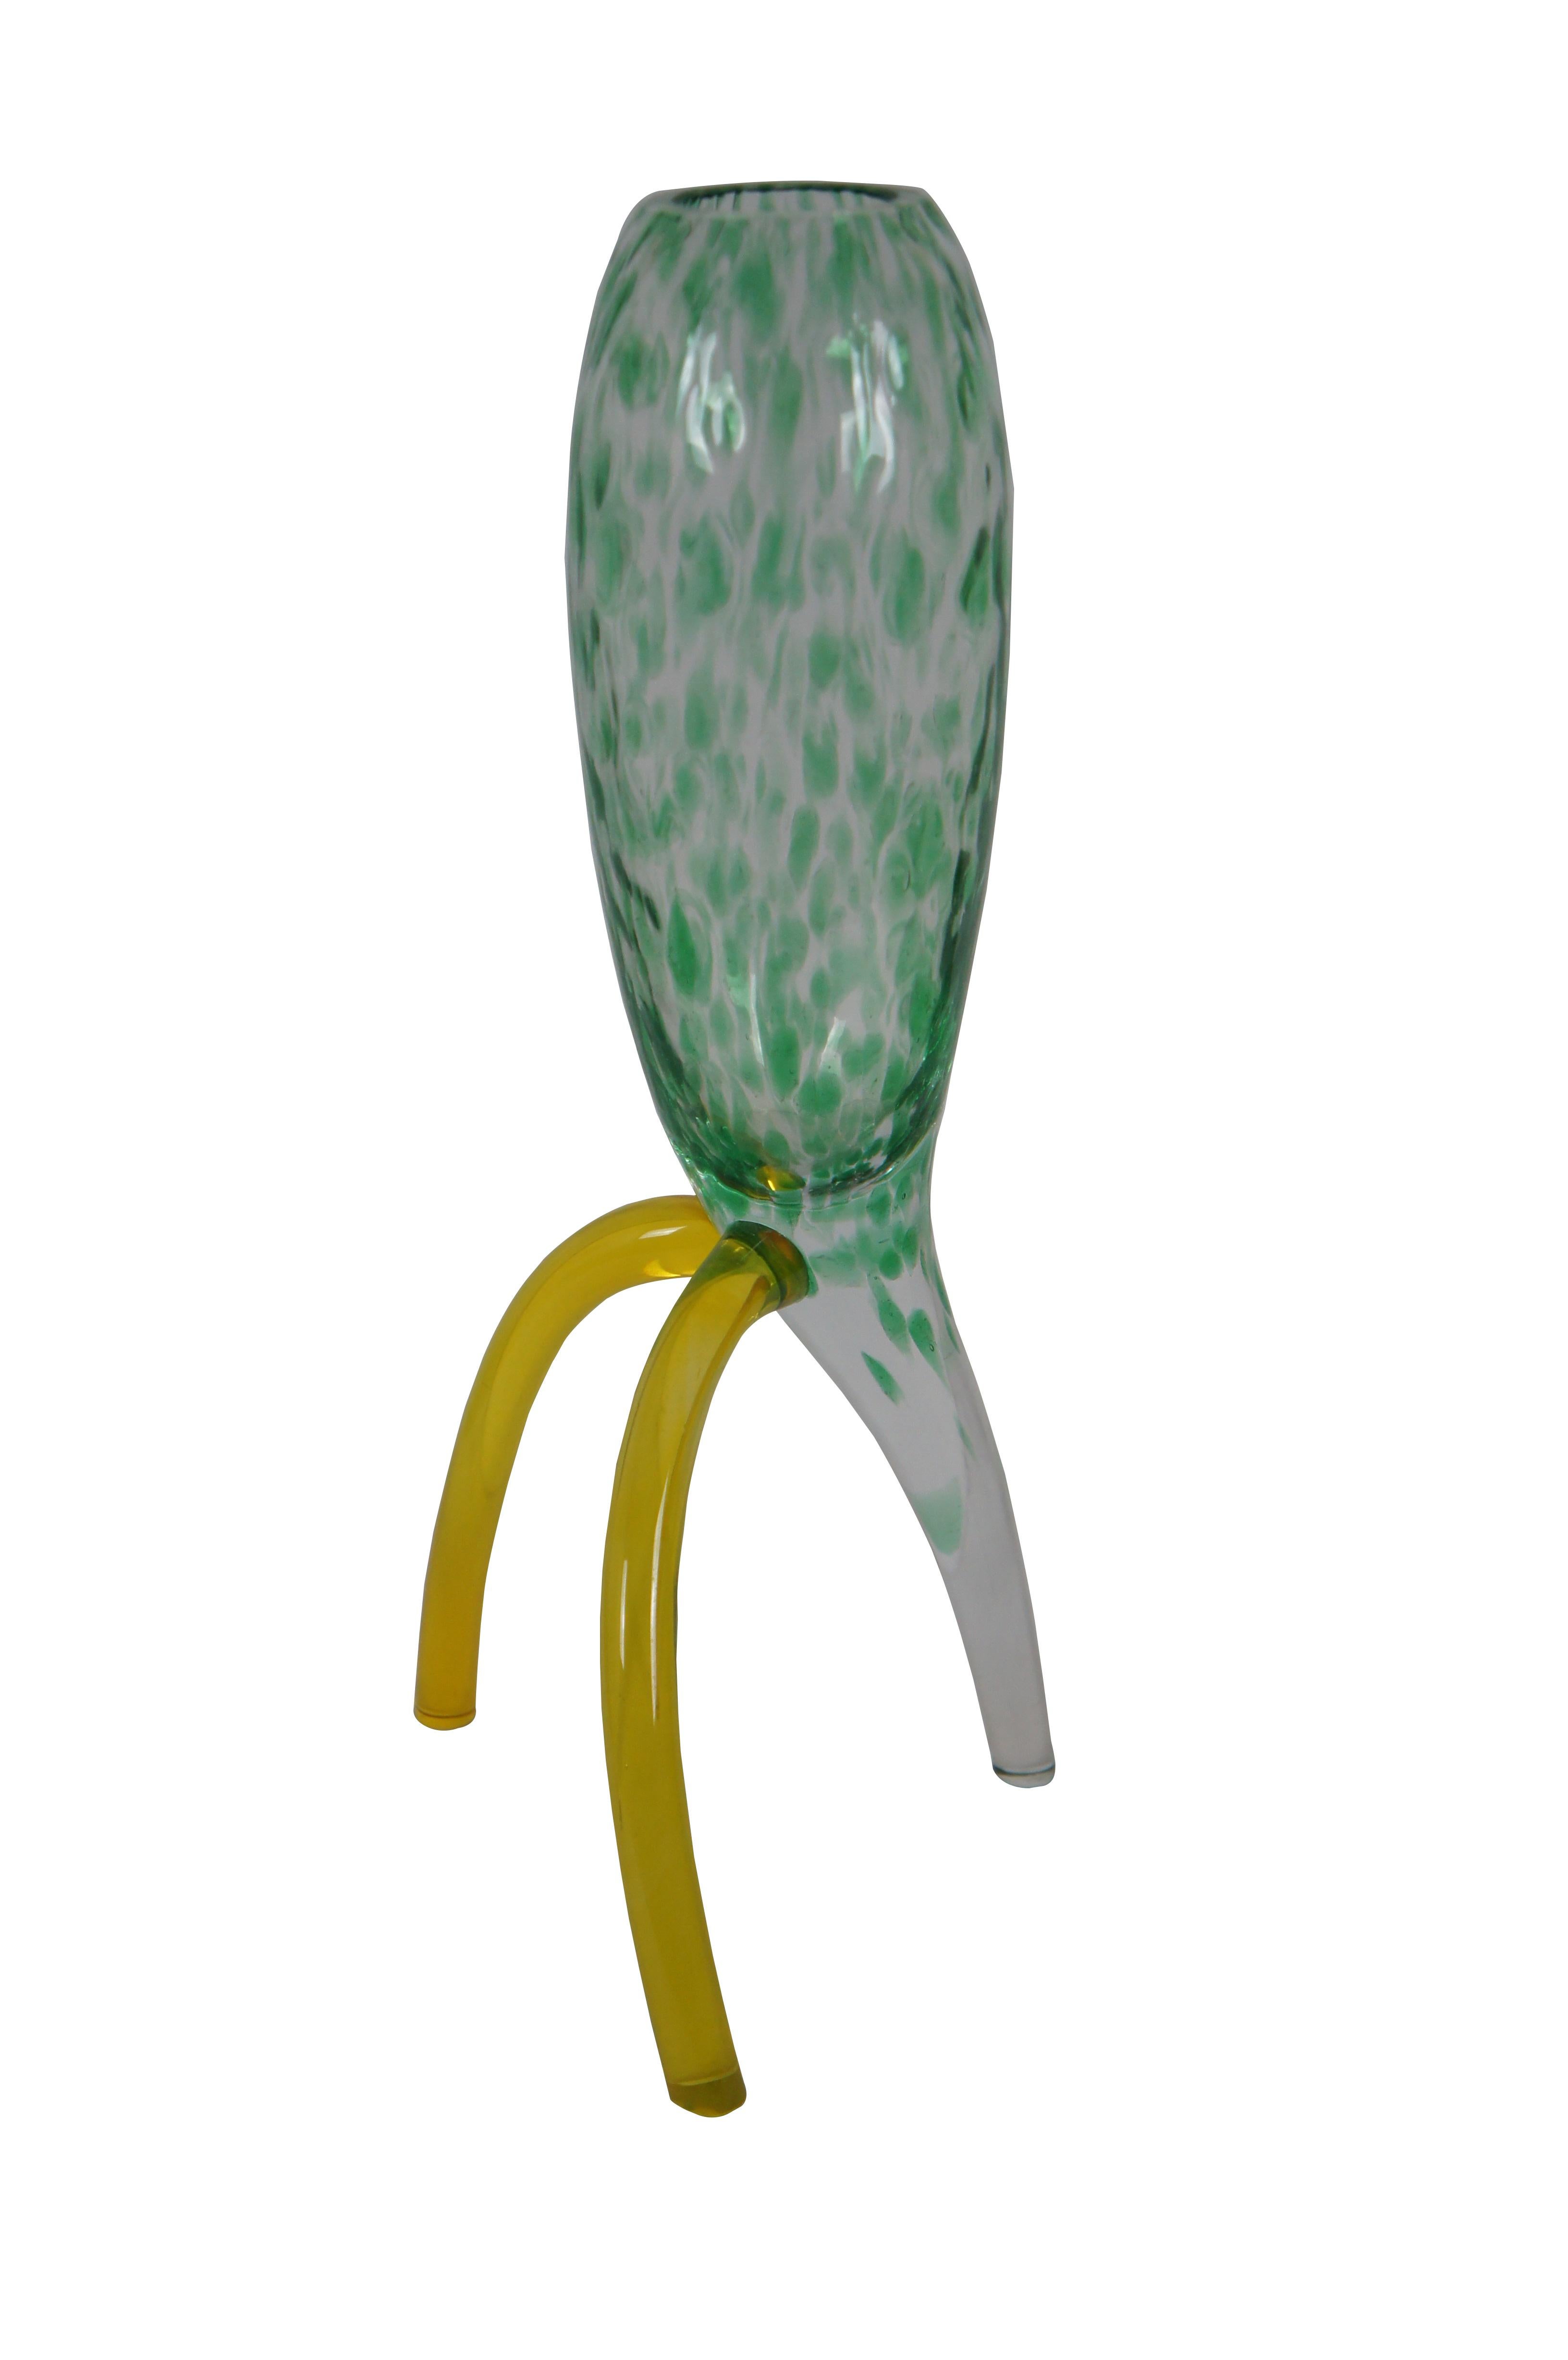 Hand blown art glass vase with a uniquely styled shape reminiscent of a mid century rocket ship. Clear glass oblong body and 